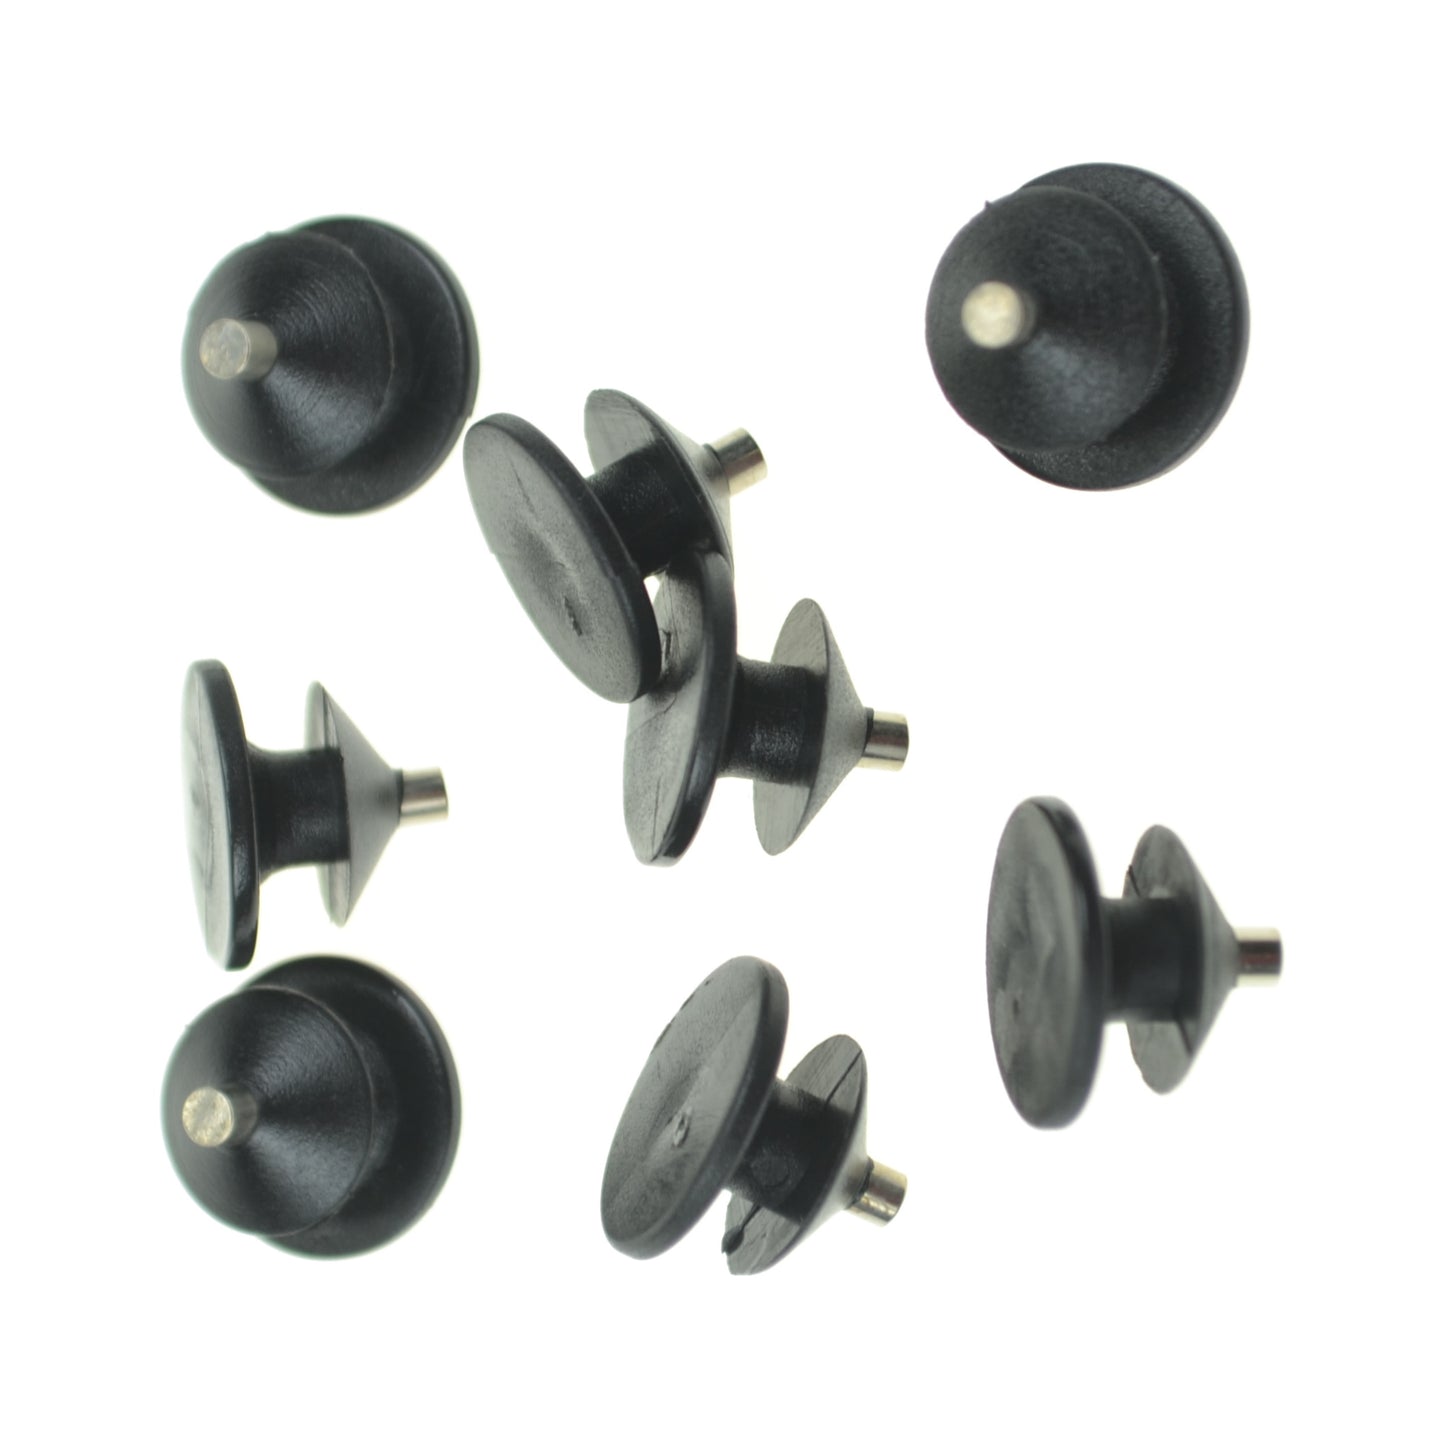 Replacement studs for Ice Grips - 4 pack